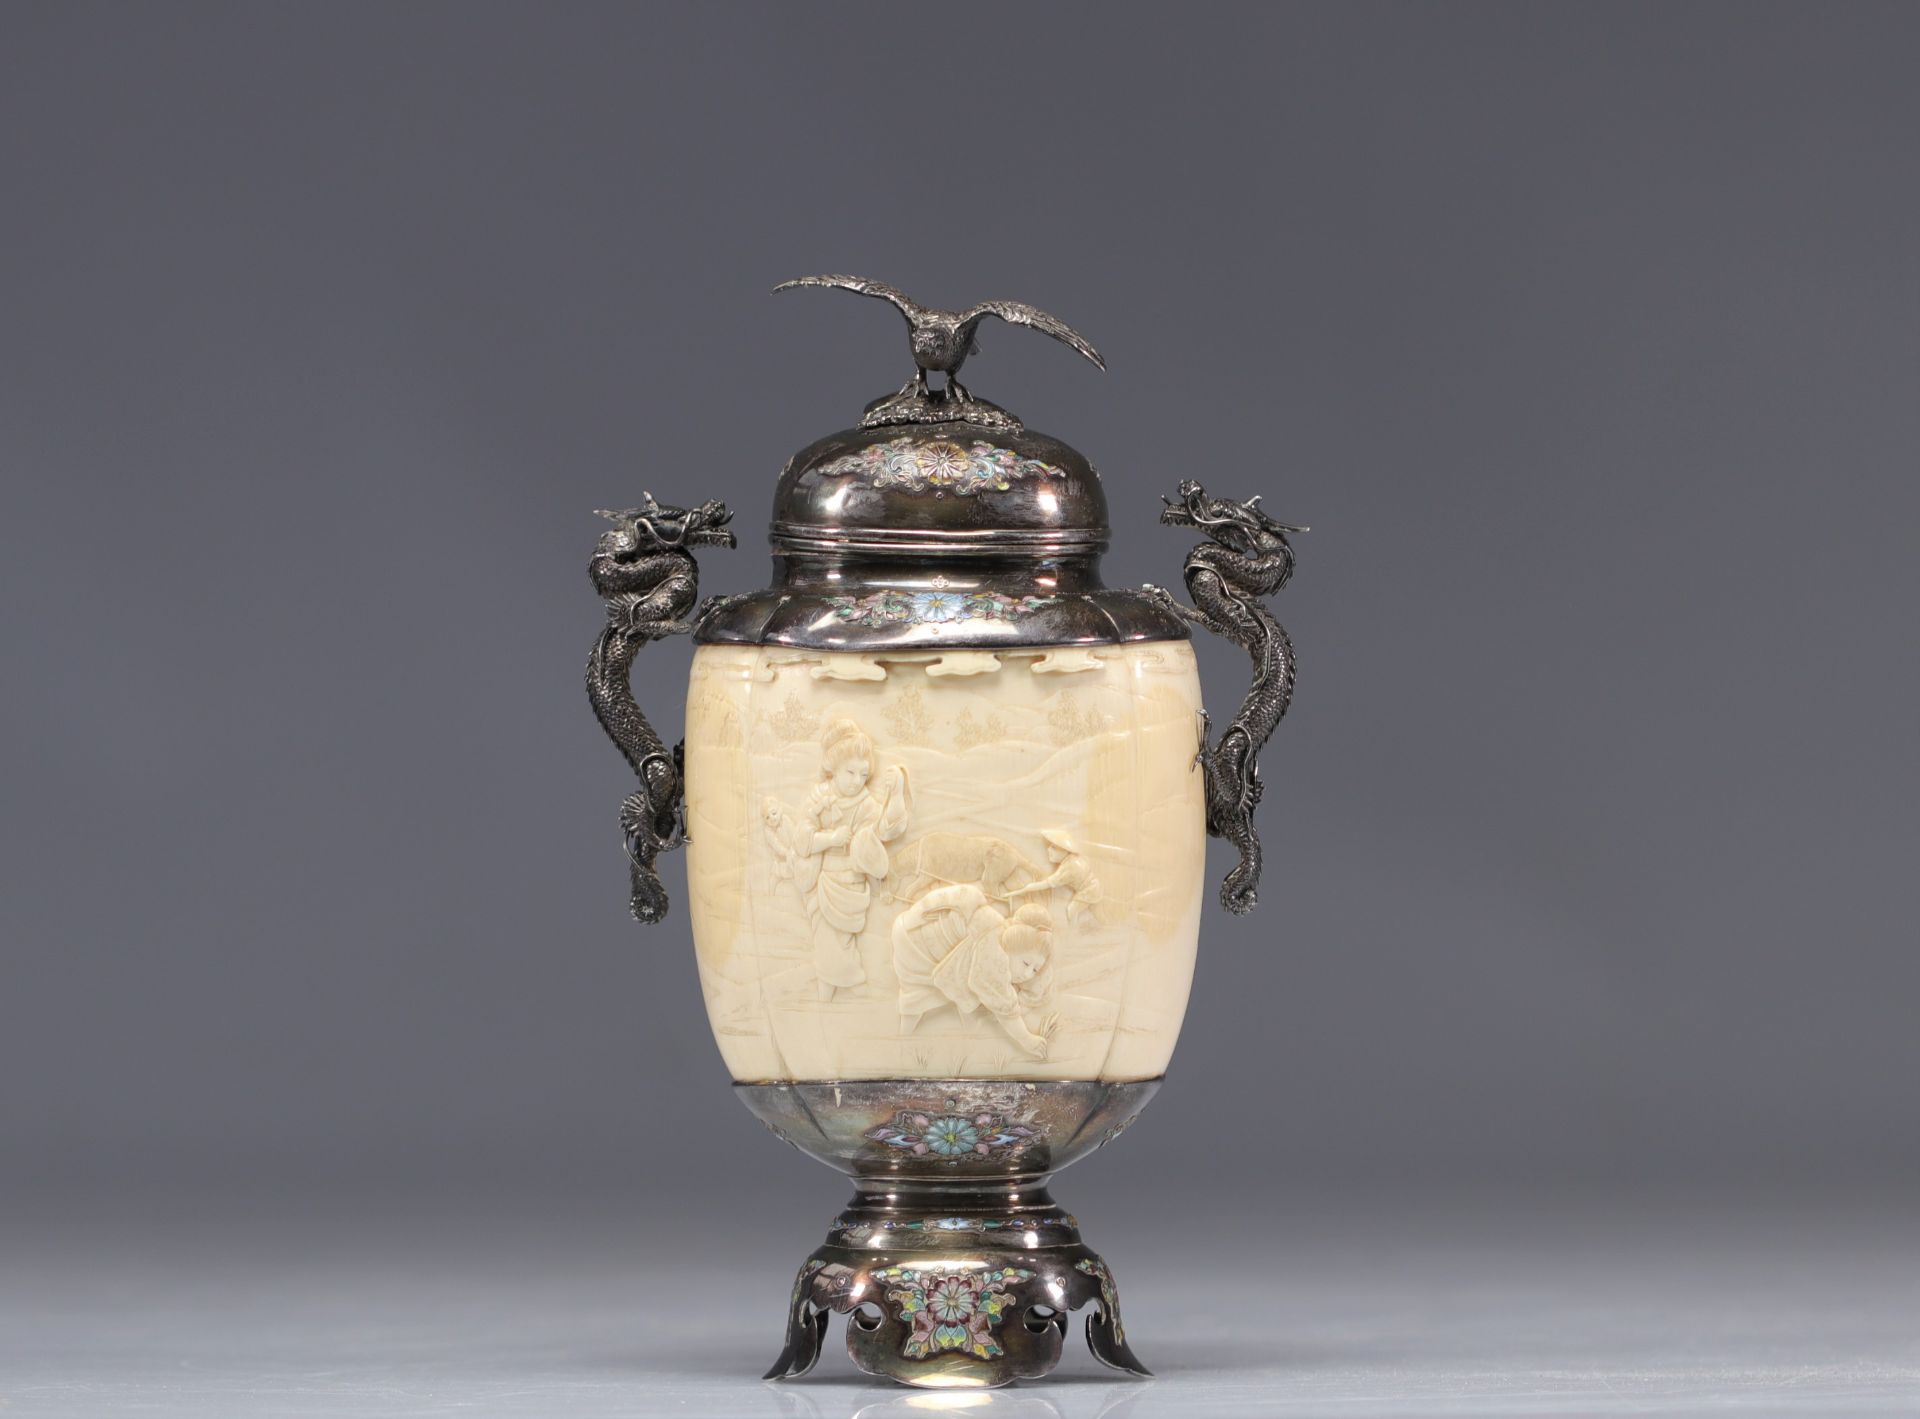 Exceptional Japanese ivory vase with a silver and enamel frame from the Meiji period (æ˜Žæ²»æ™‚ä»£ -